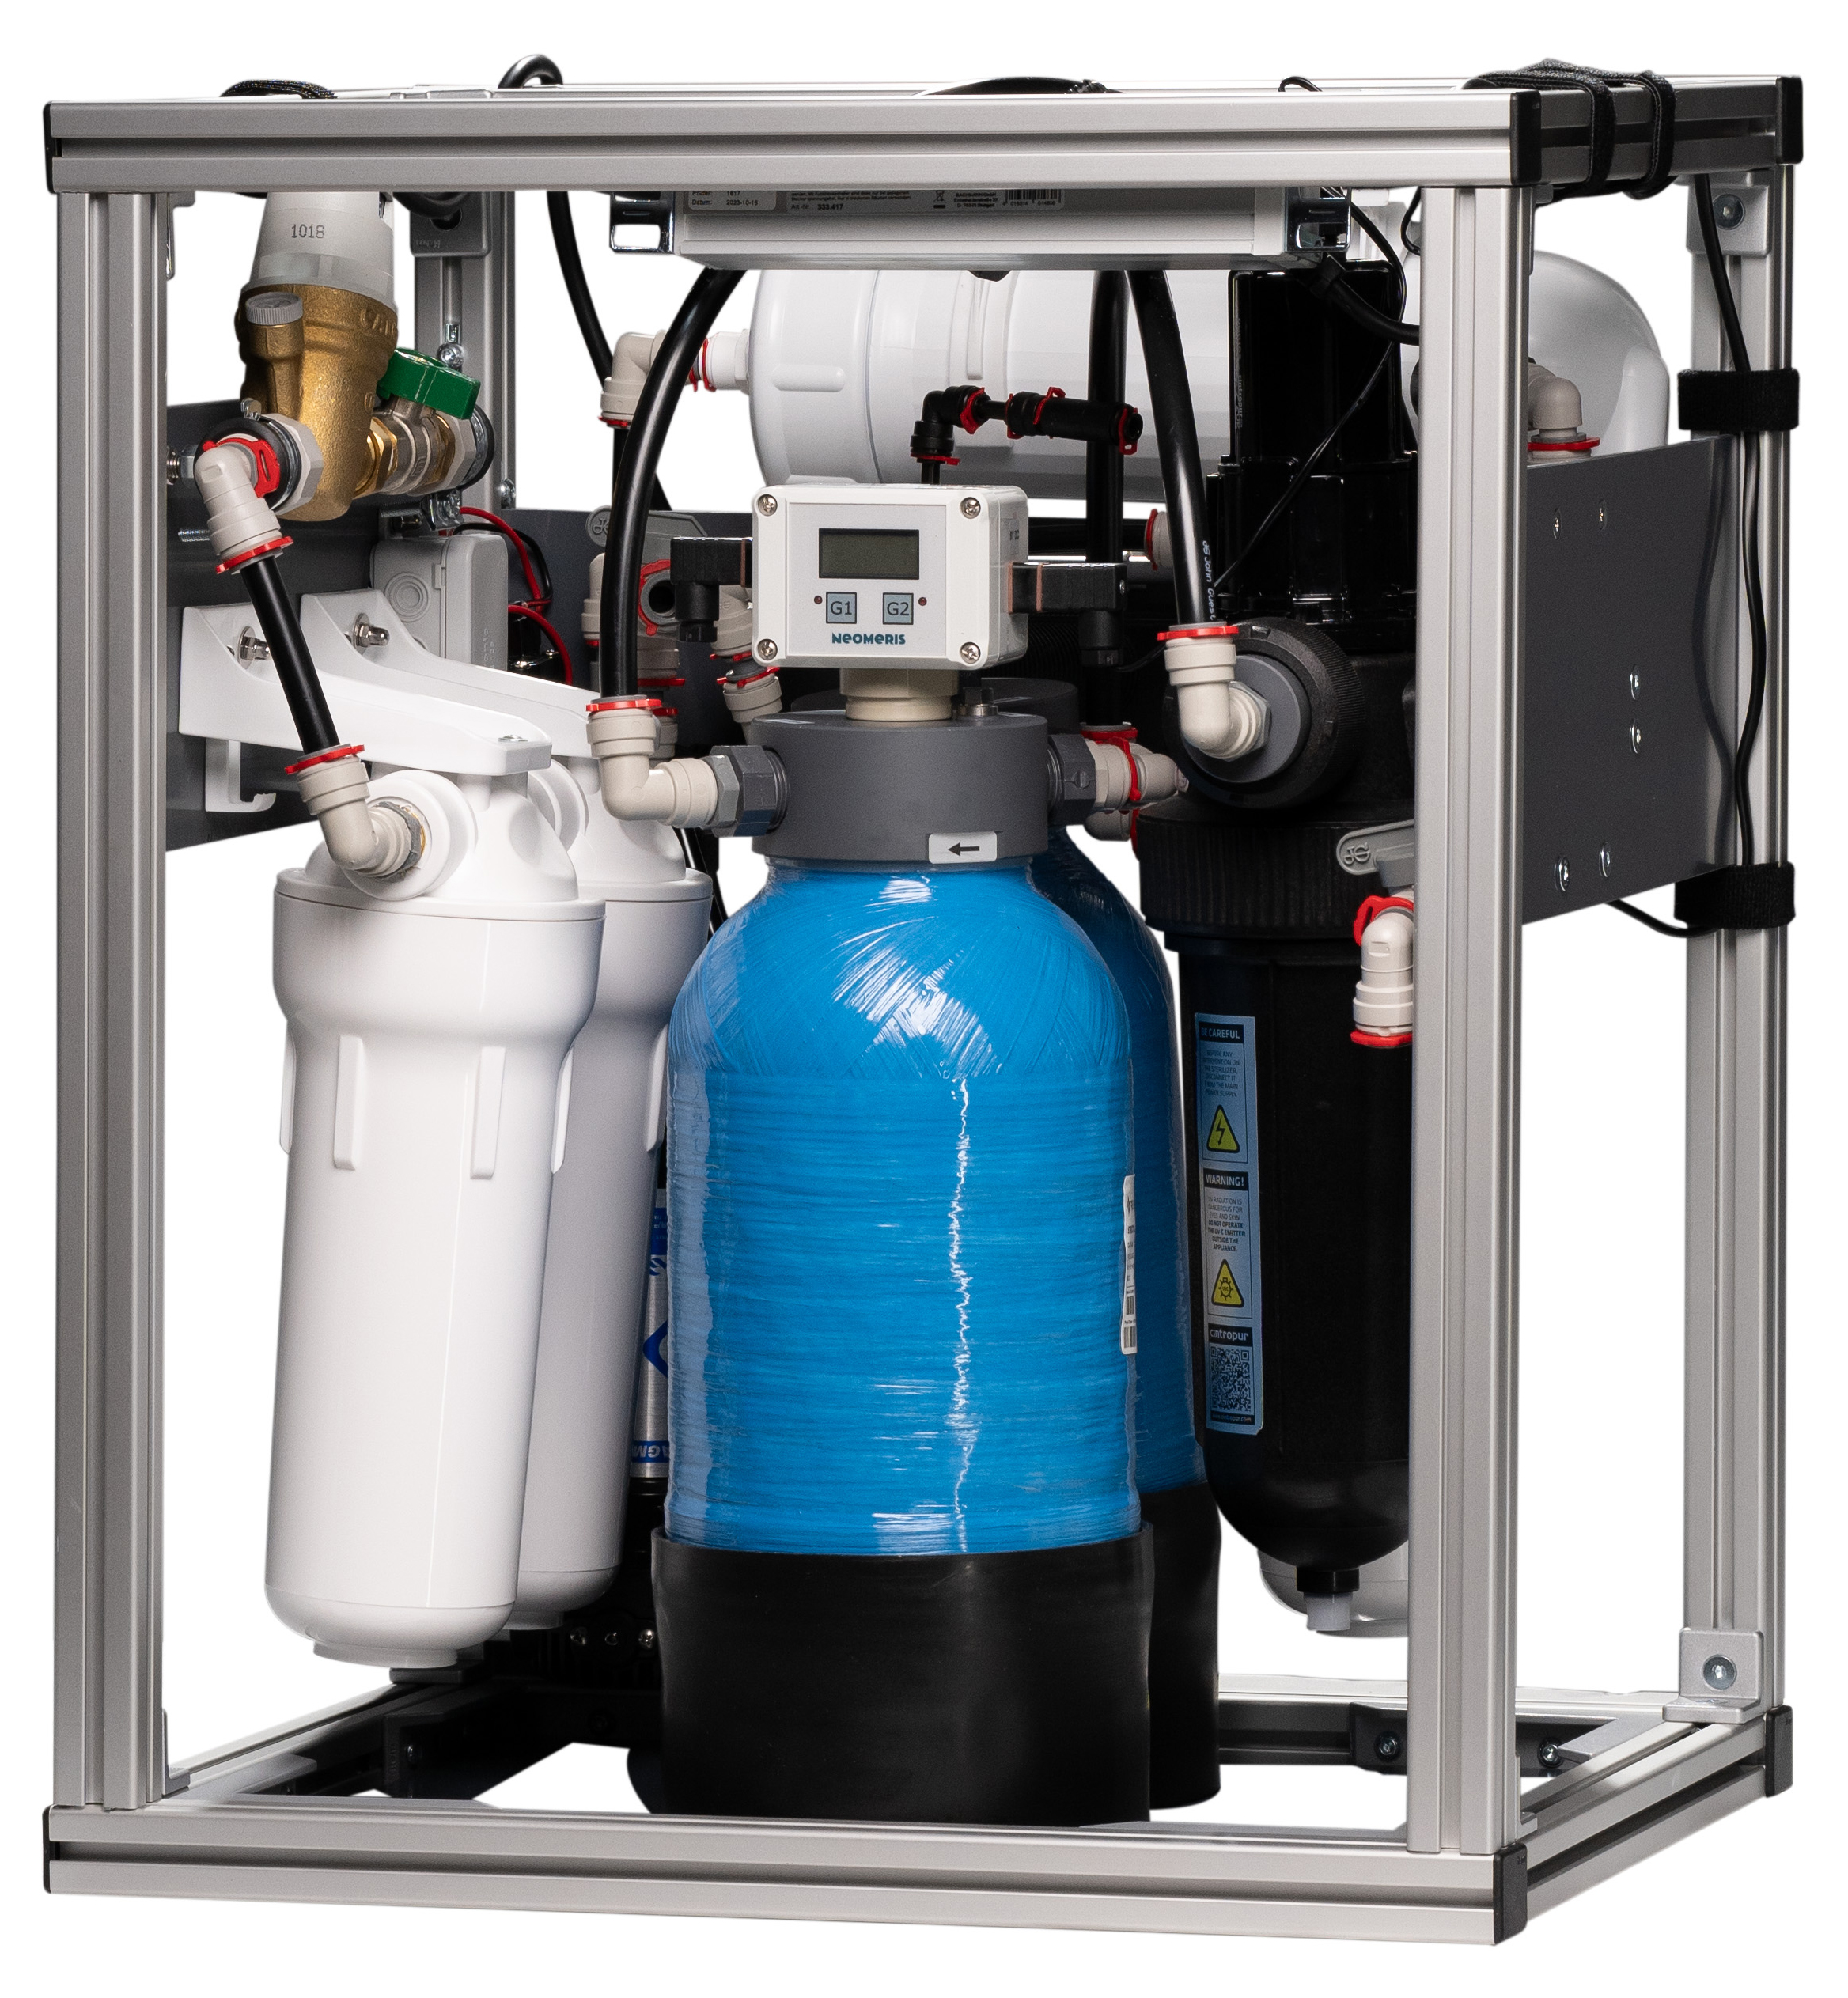 Water treatment system as an under-counter system for outpatient clinics, incl. UV system and pyrogen filter